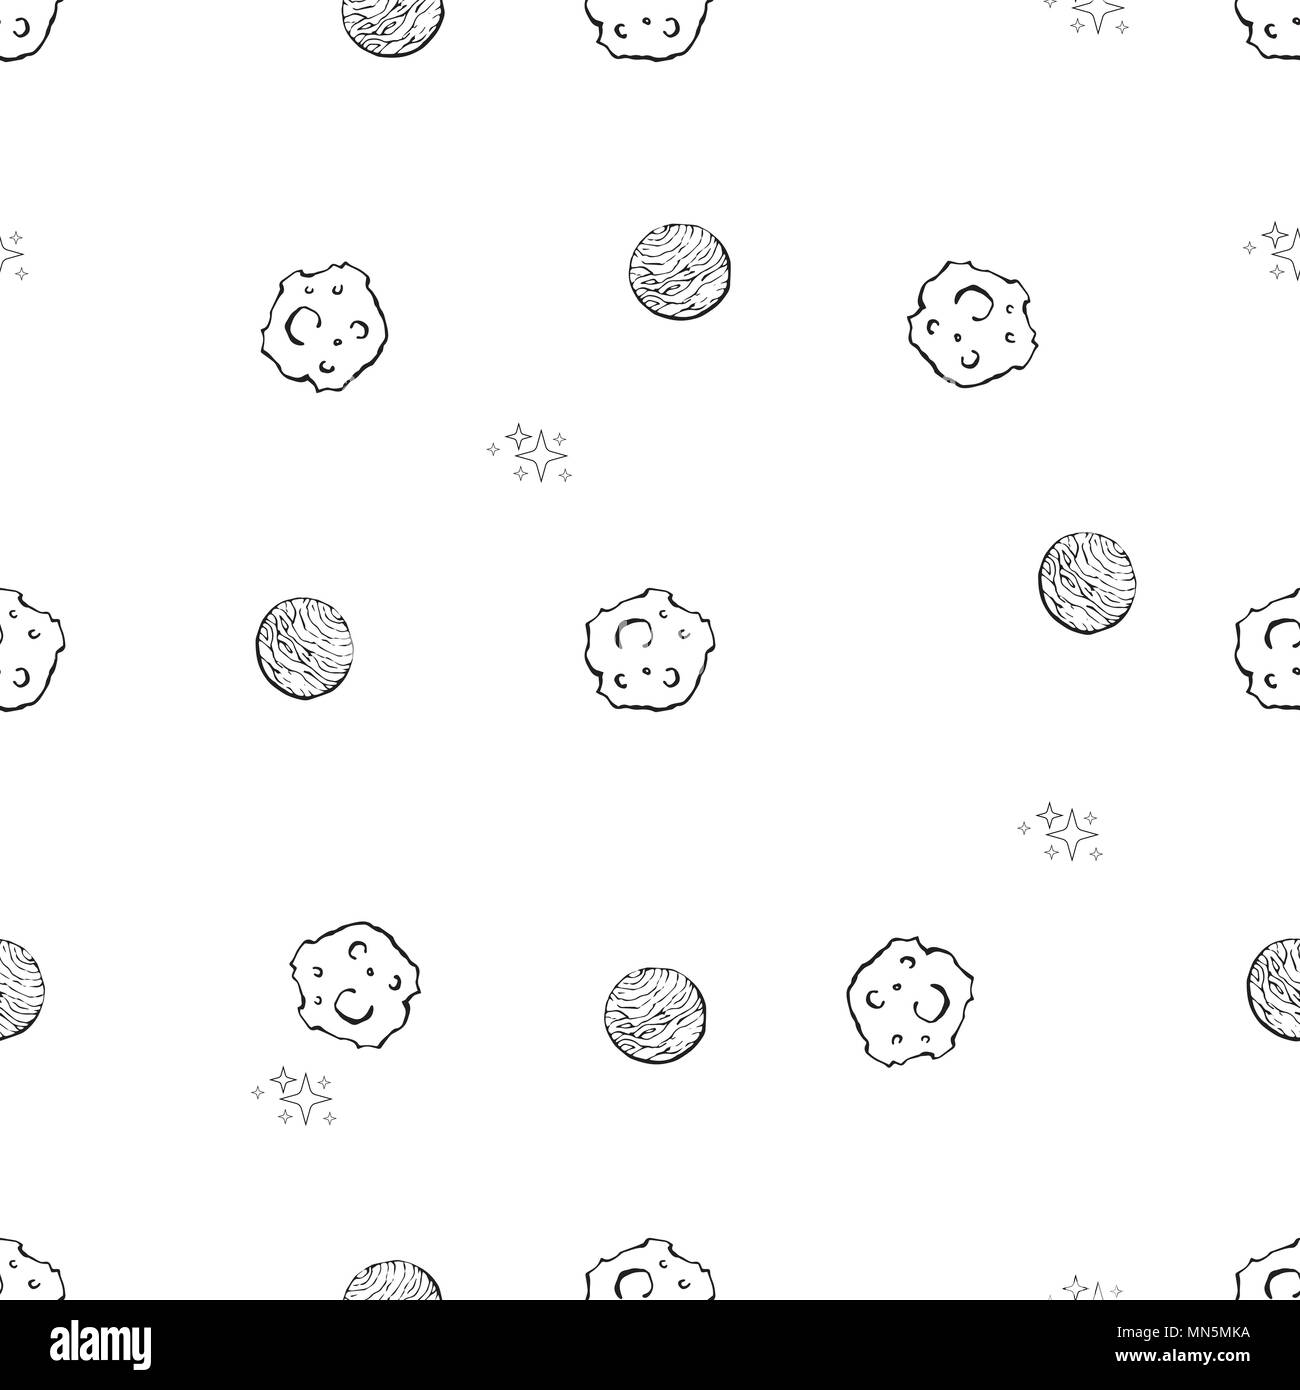 Seamless vector pattern. Creative hand drawn texture with planets and stars. Stock Vector